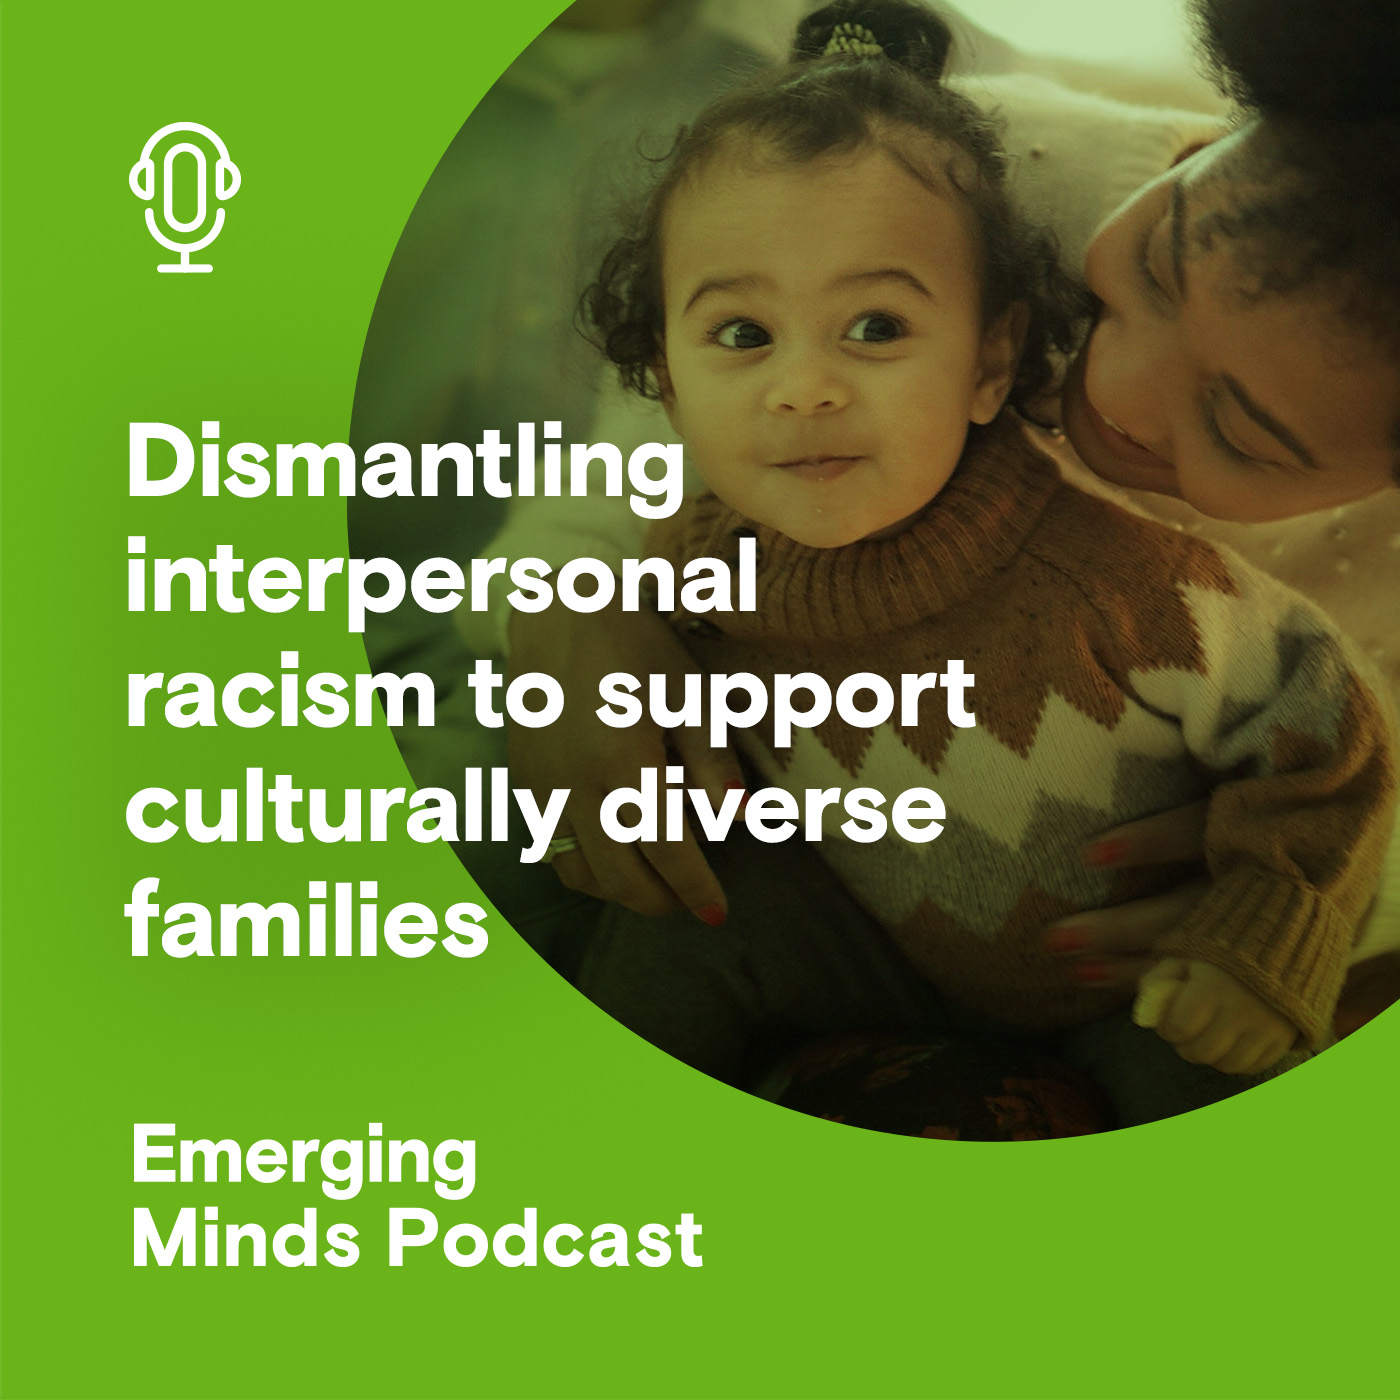 Dismantling interpersonal racism to support culturally diverse families